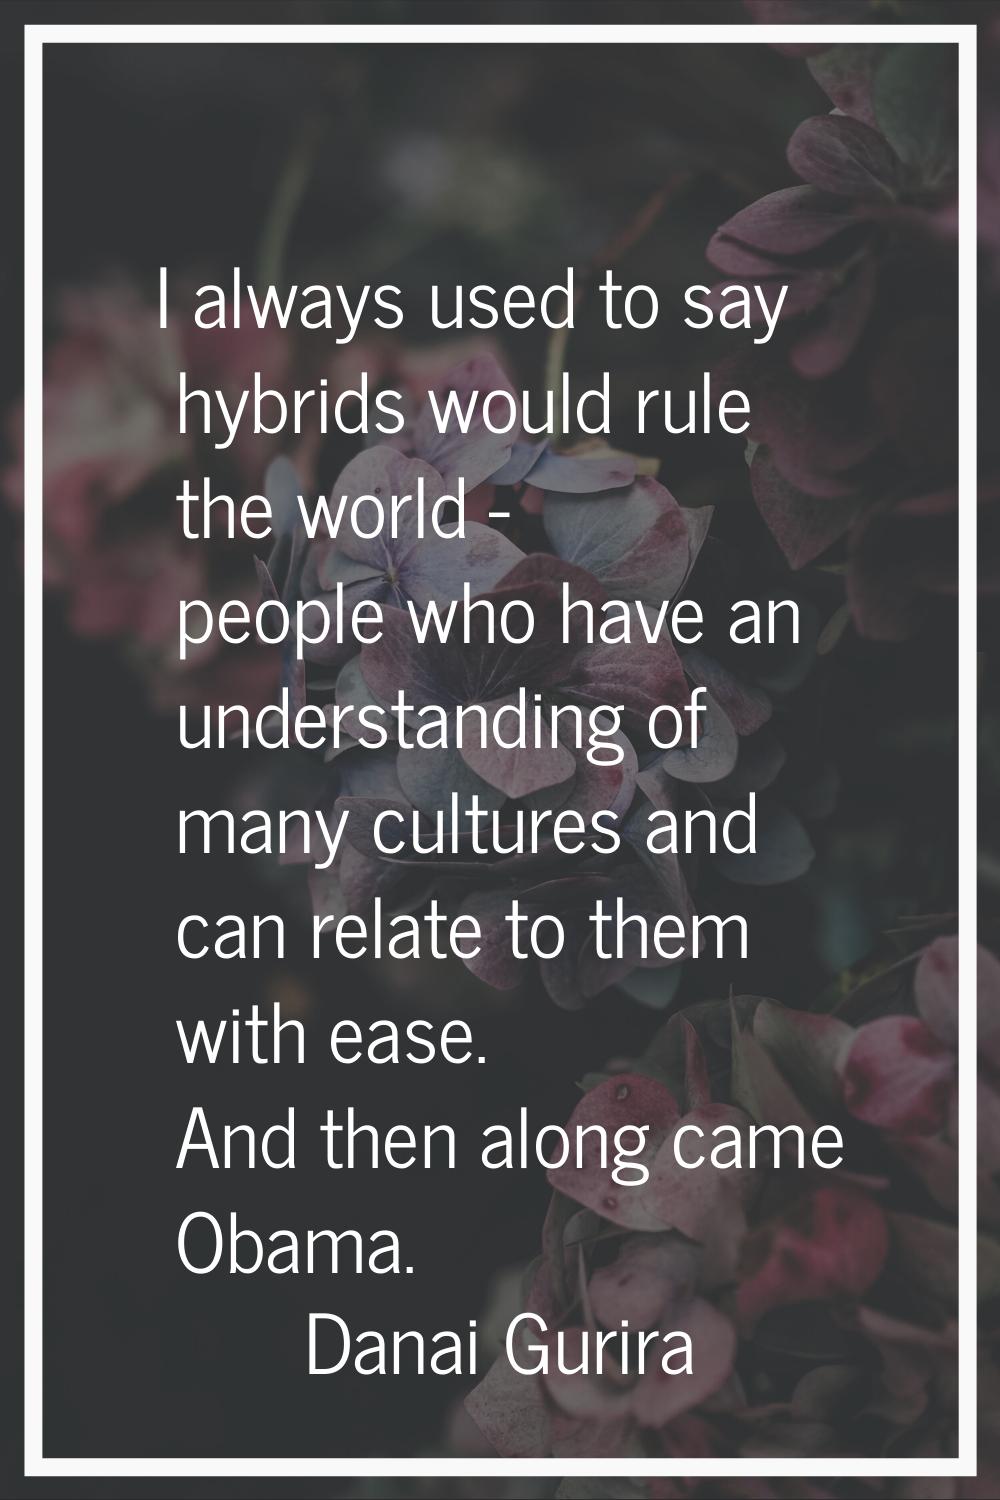 I always used to say hybrids would rule the world - people who have an understanding of many cultur